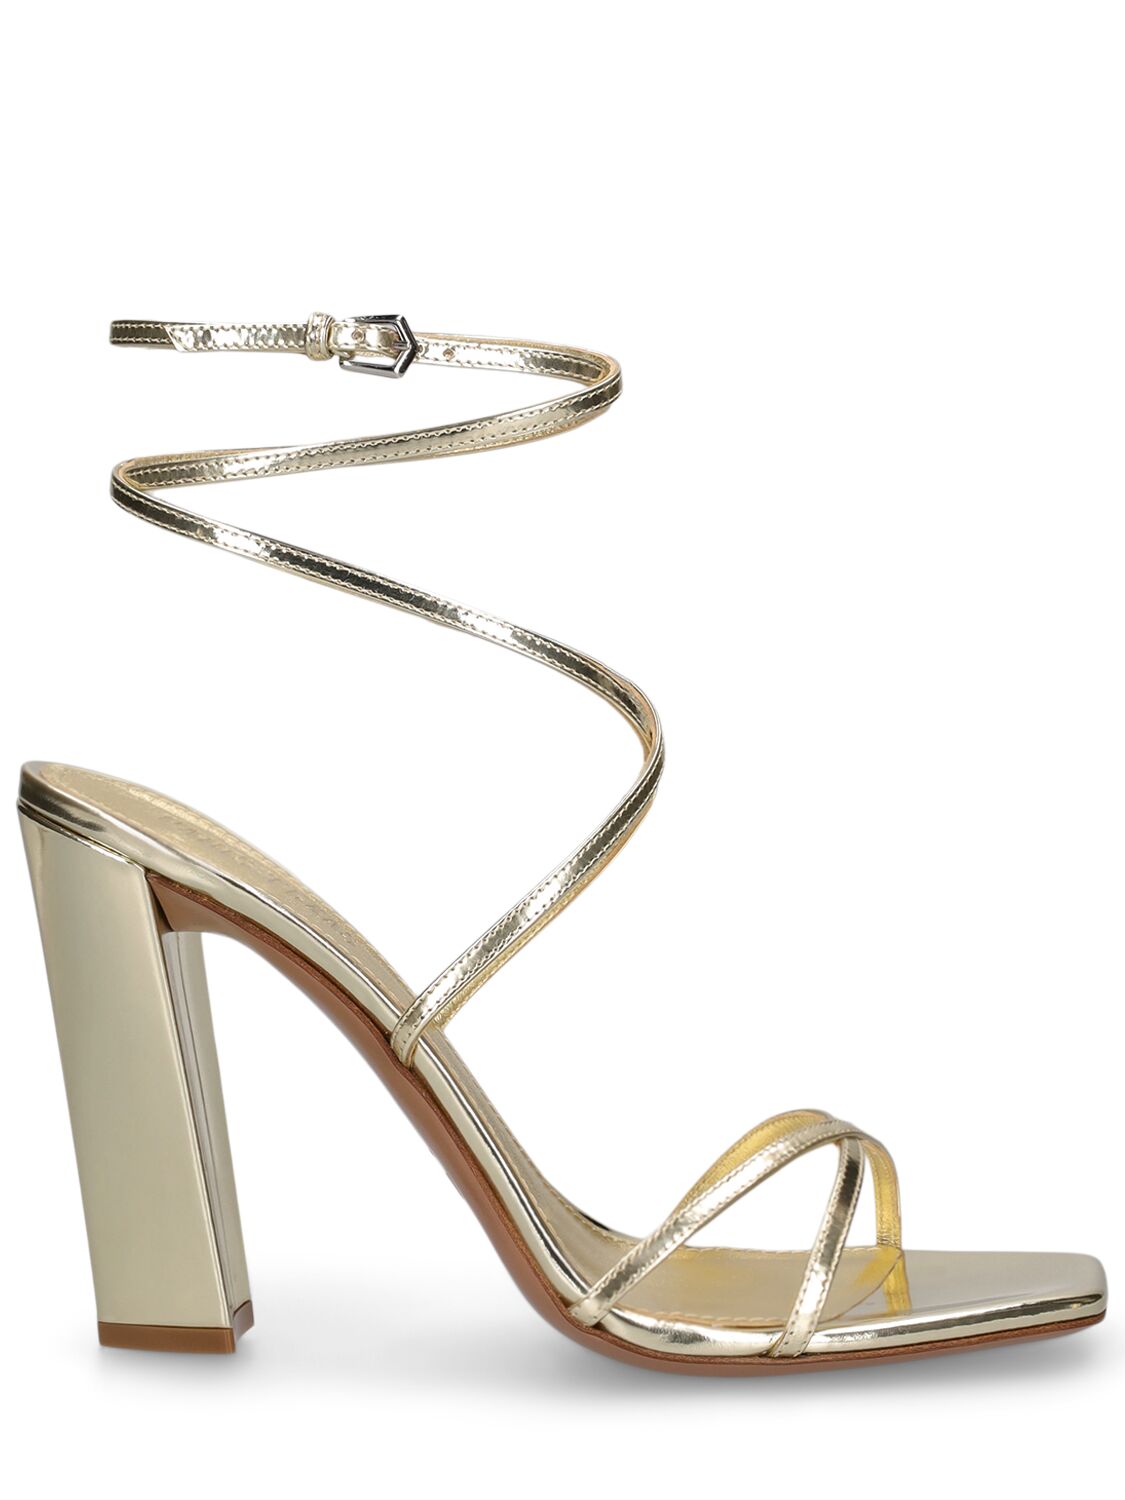 Paris Texas 105mm Diana Mirror Leather Sandals In Gold